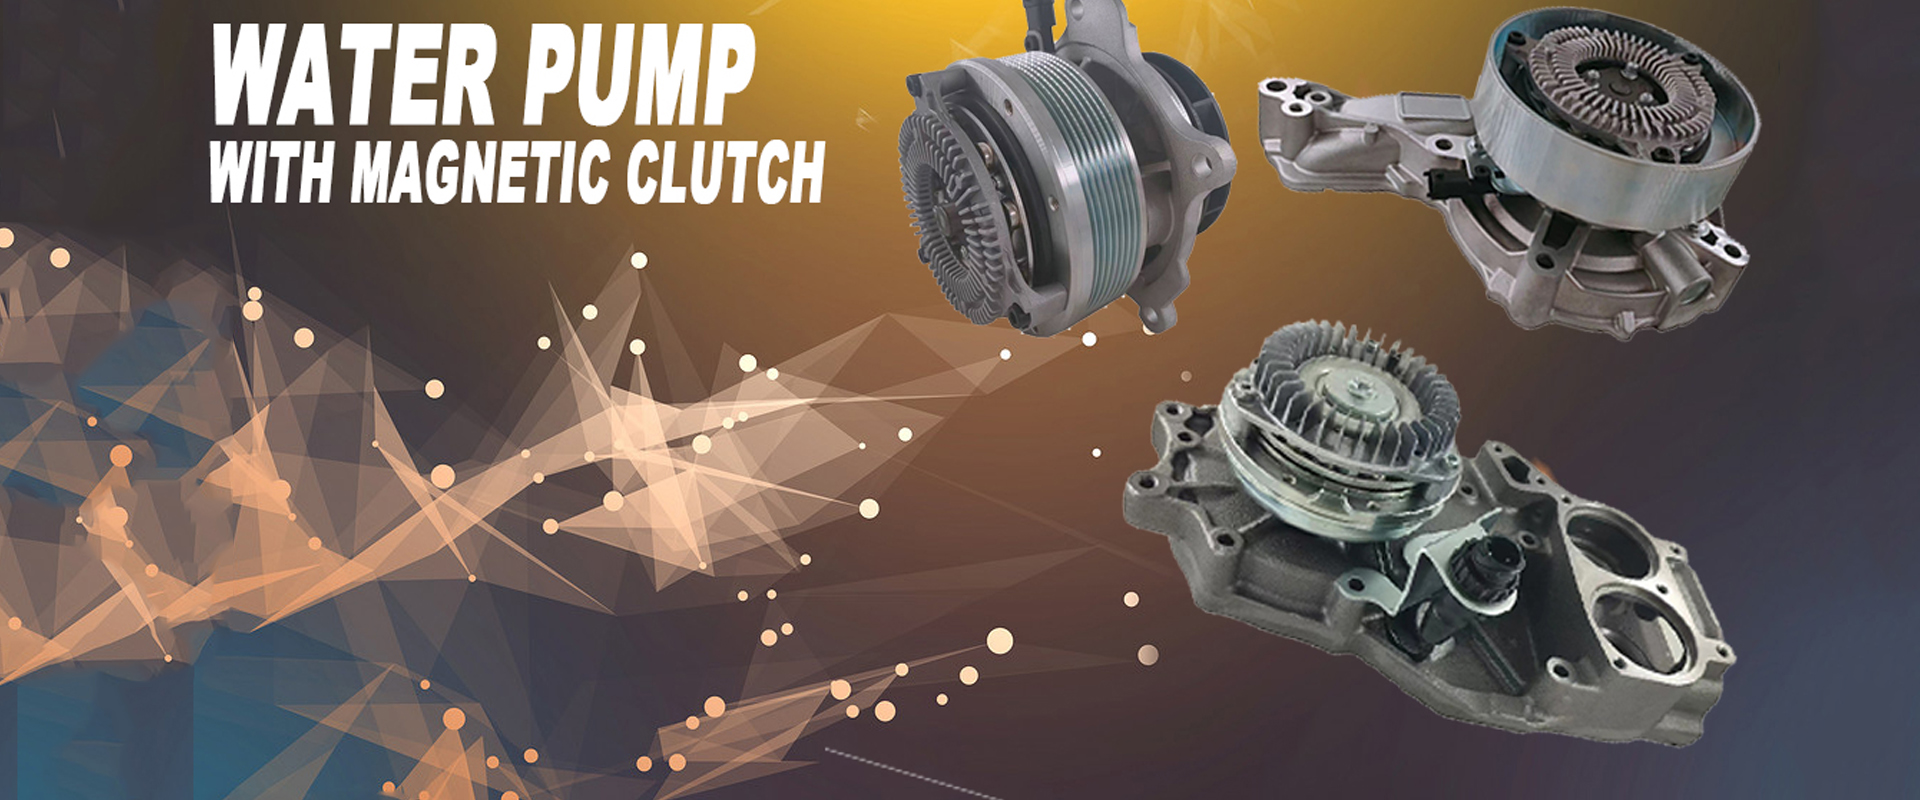 engine electric water pump